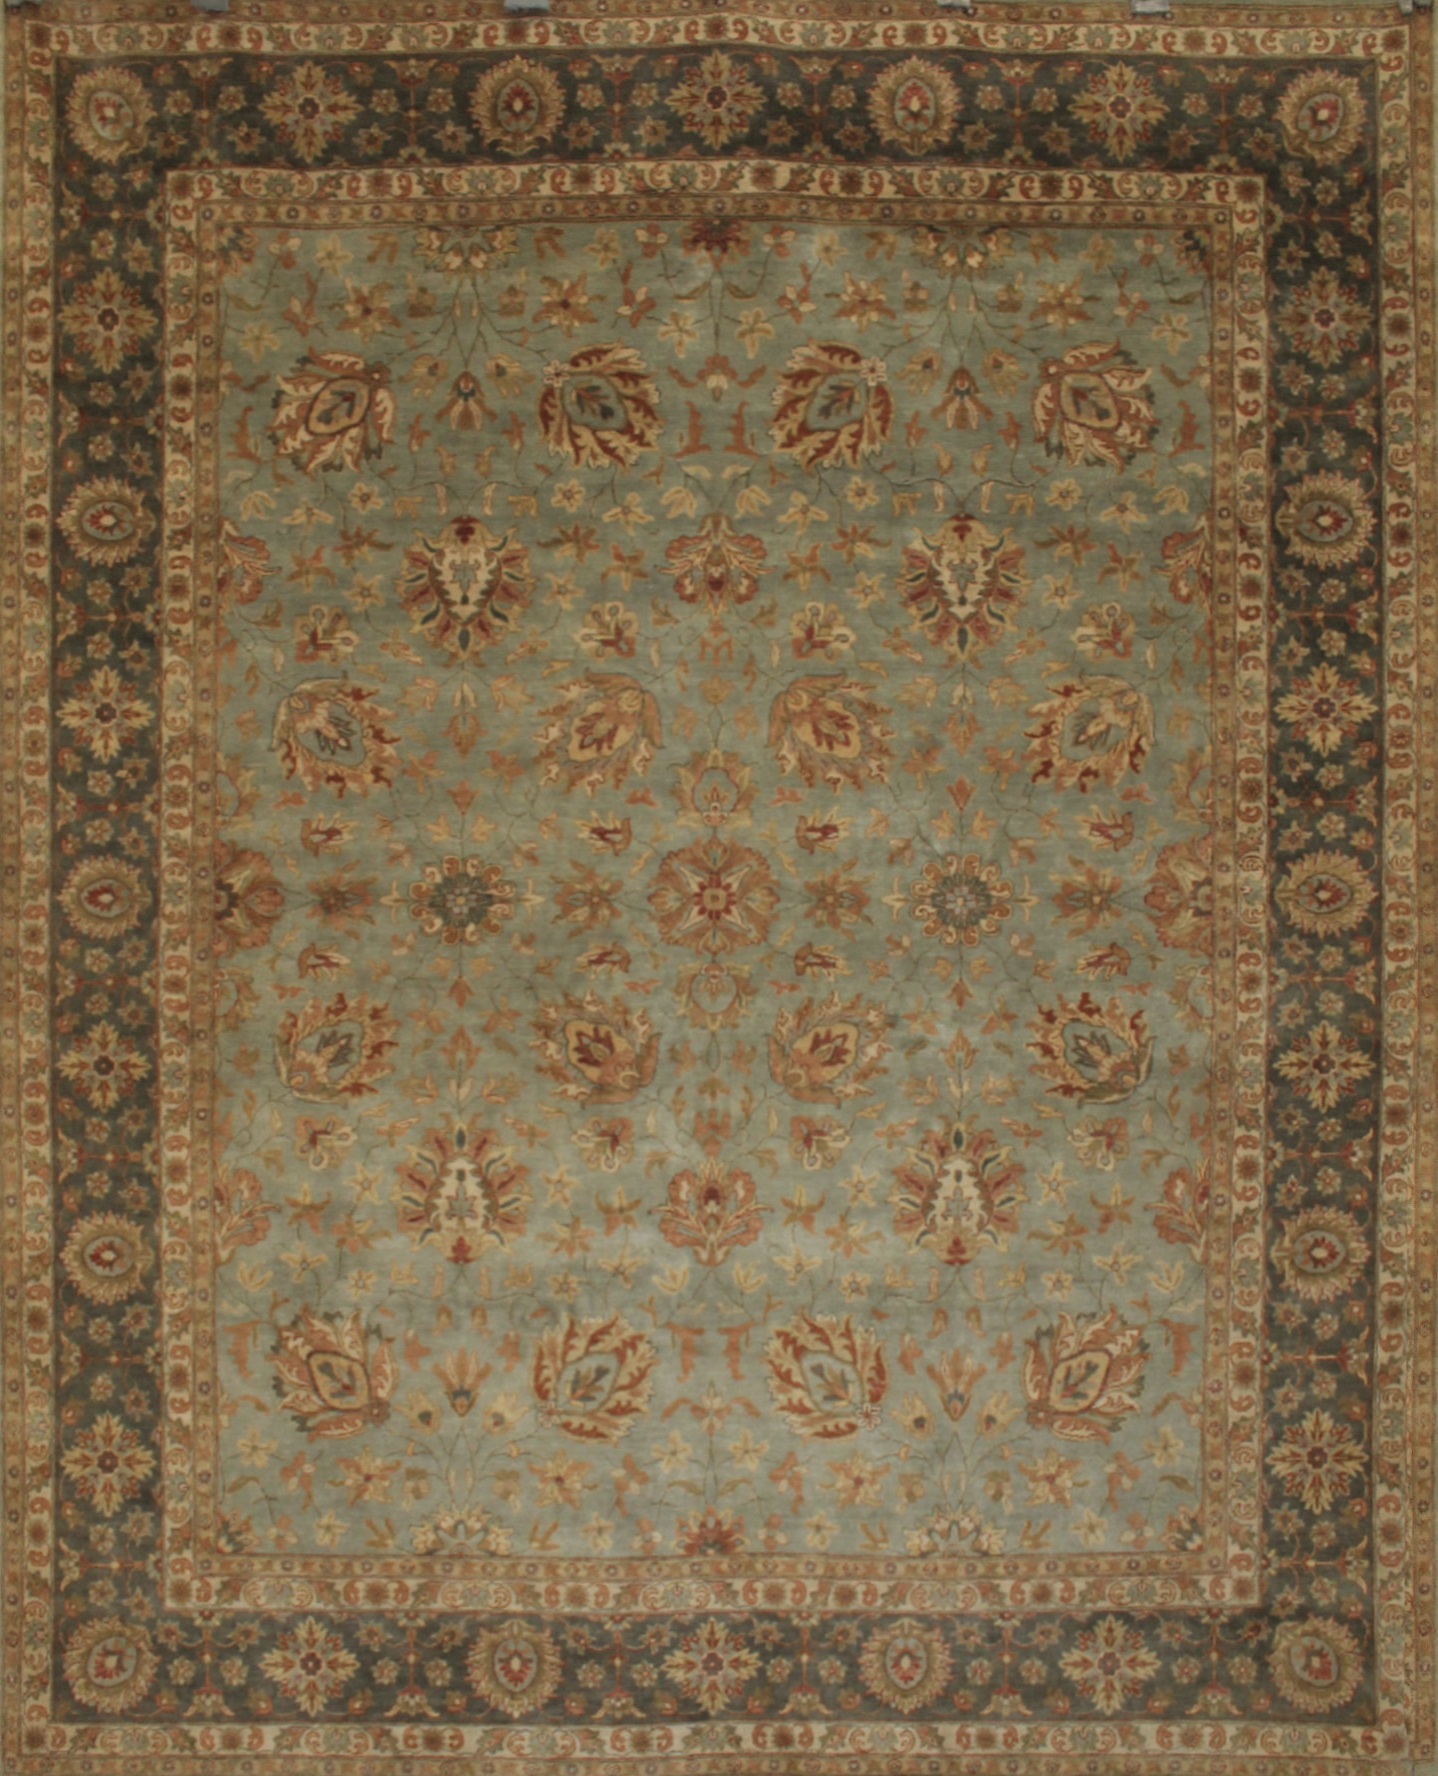 Clearance & Discount Rugs Hand Knotted Wool Rug 9550 Lt. Blue - Blue & Lt. Grey - Grey Hand Knotted Rug